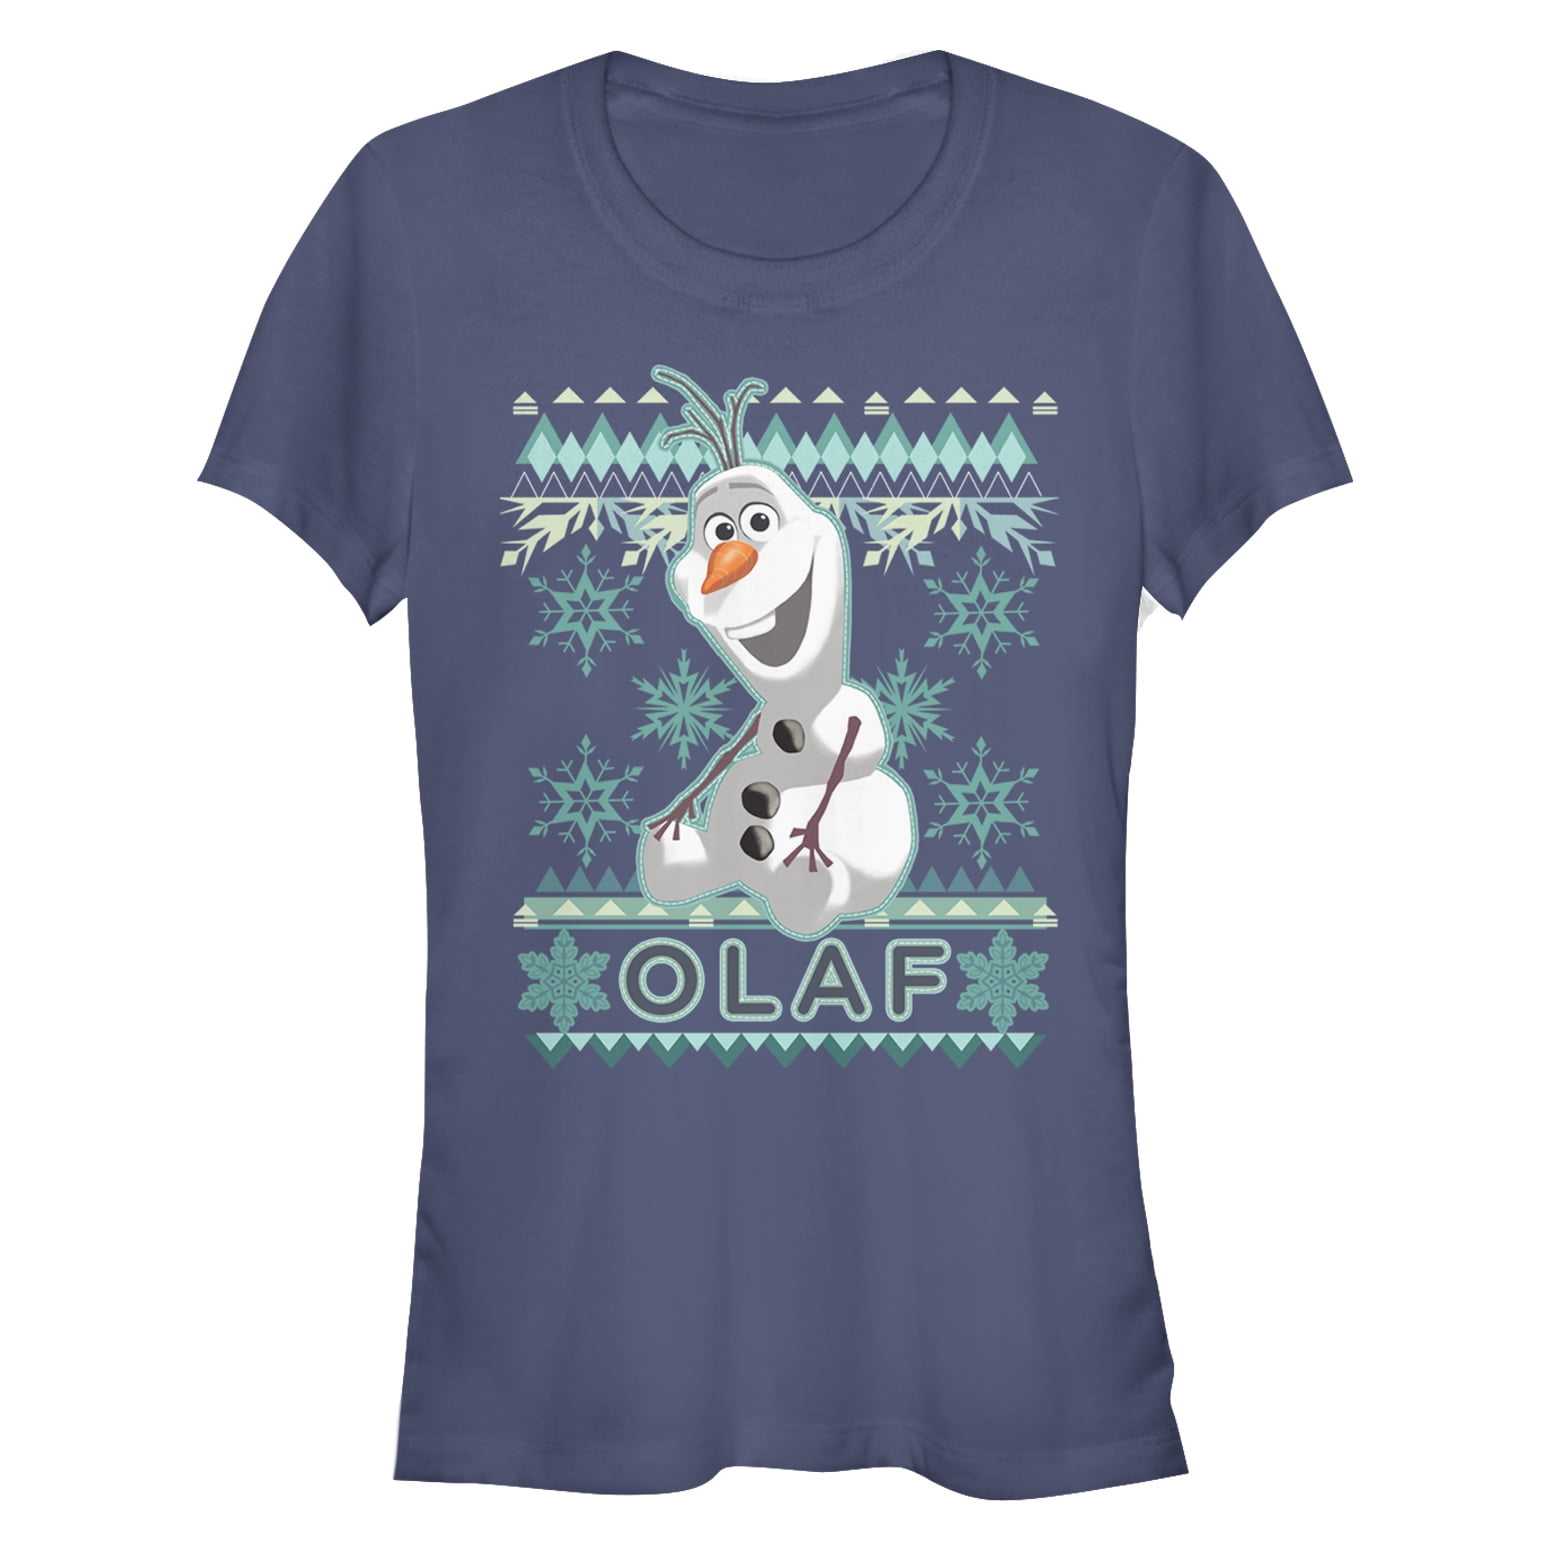 New Kids Do You Want To Build A Snowman Olaf Frozen Minon Christmas Jumper 